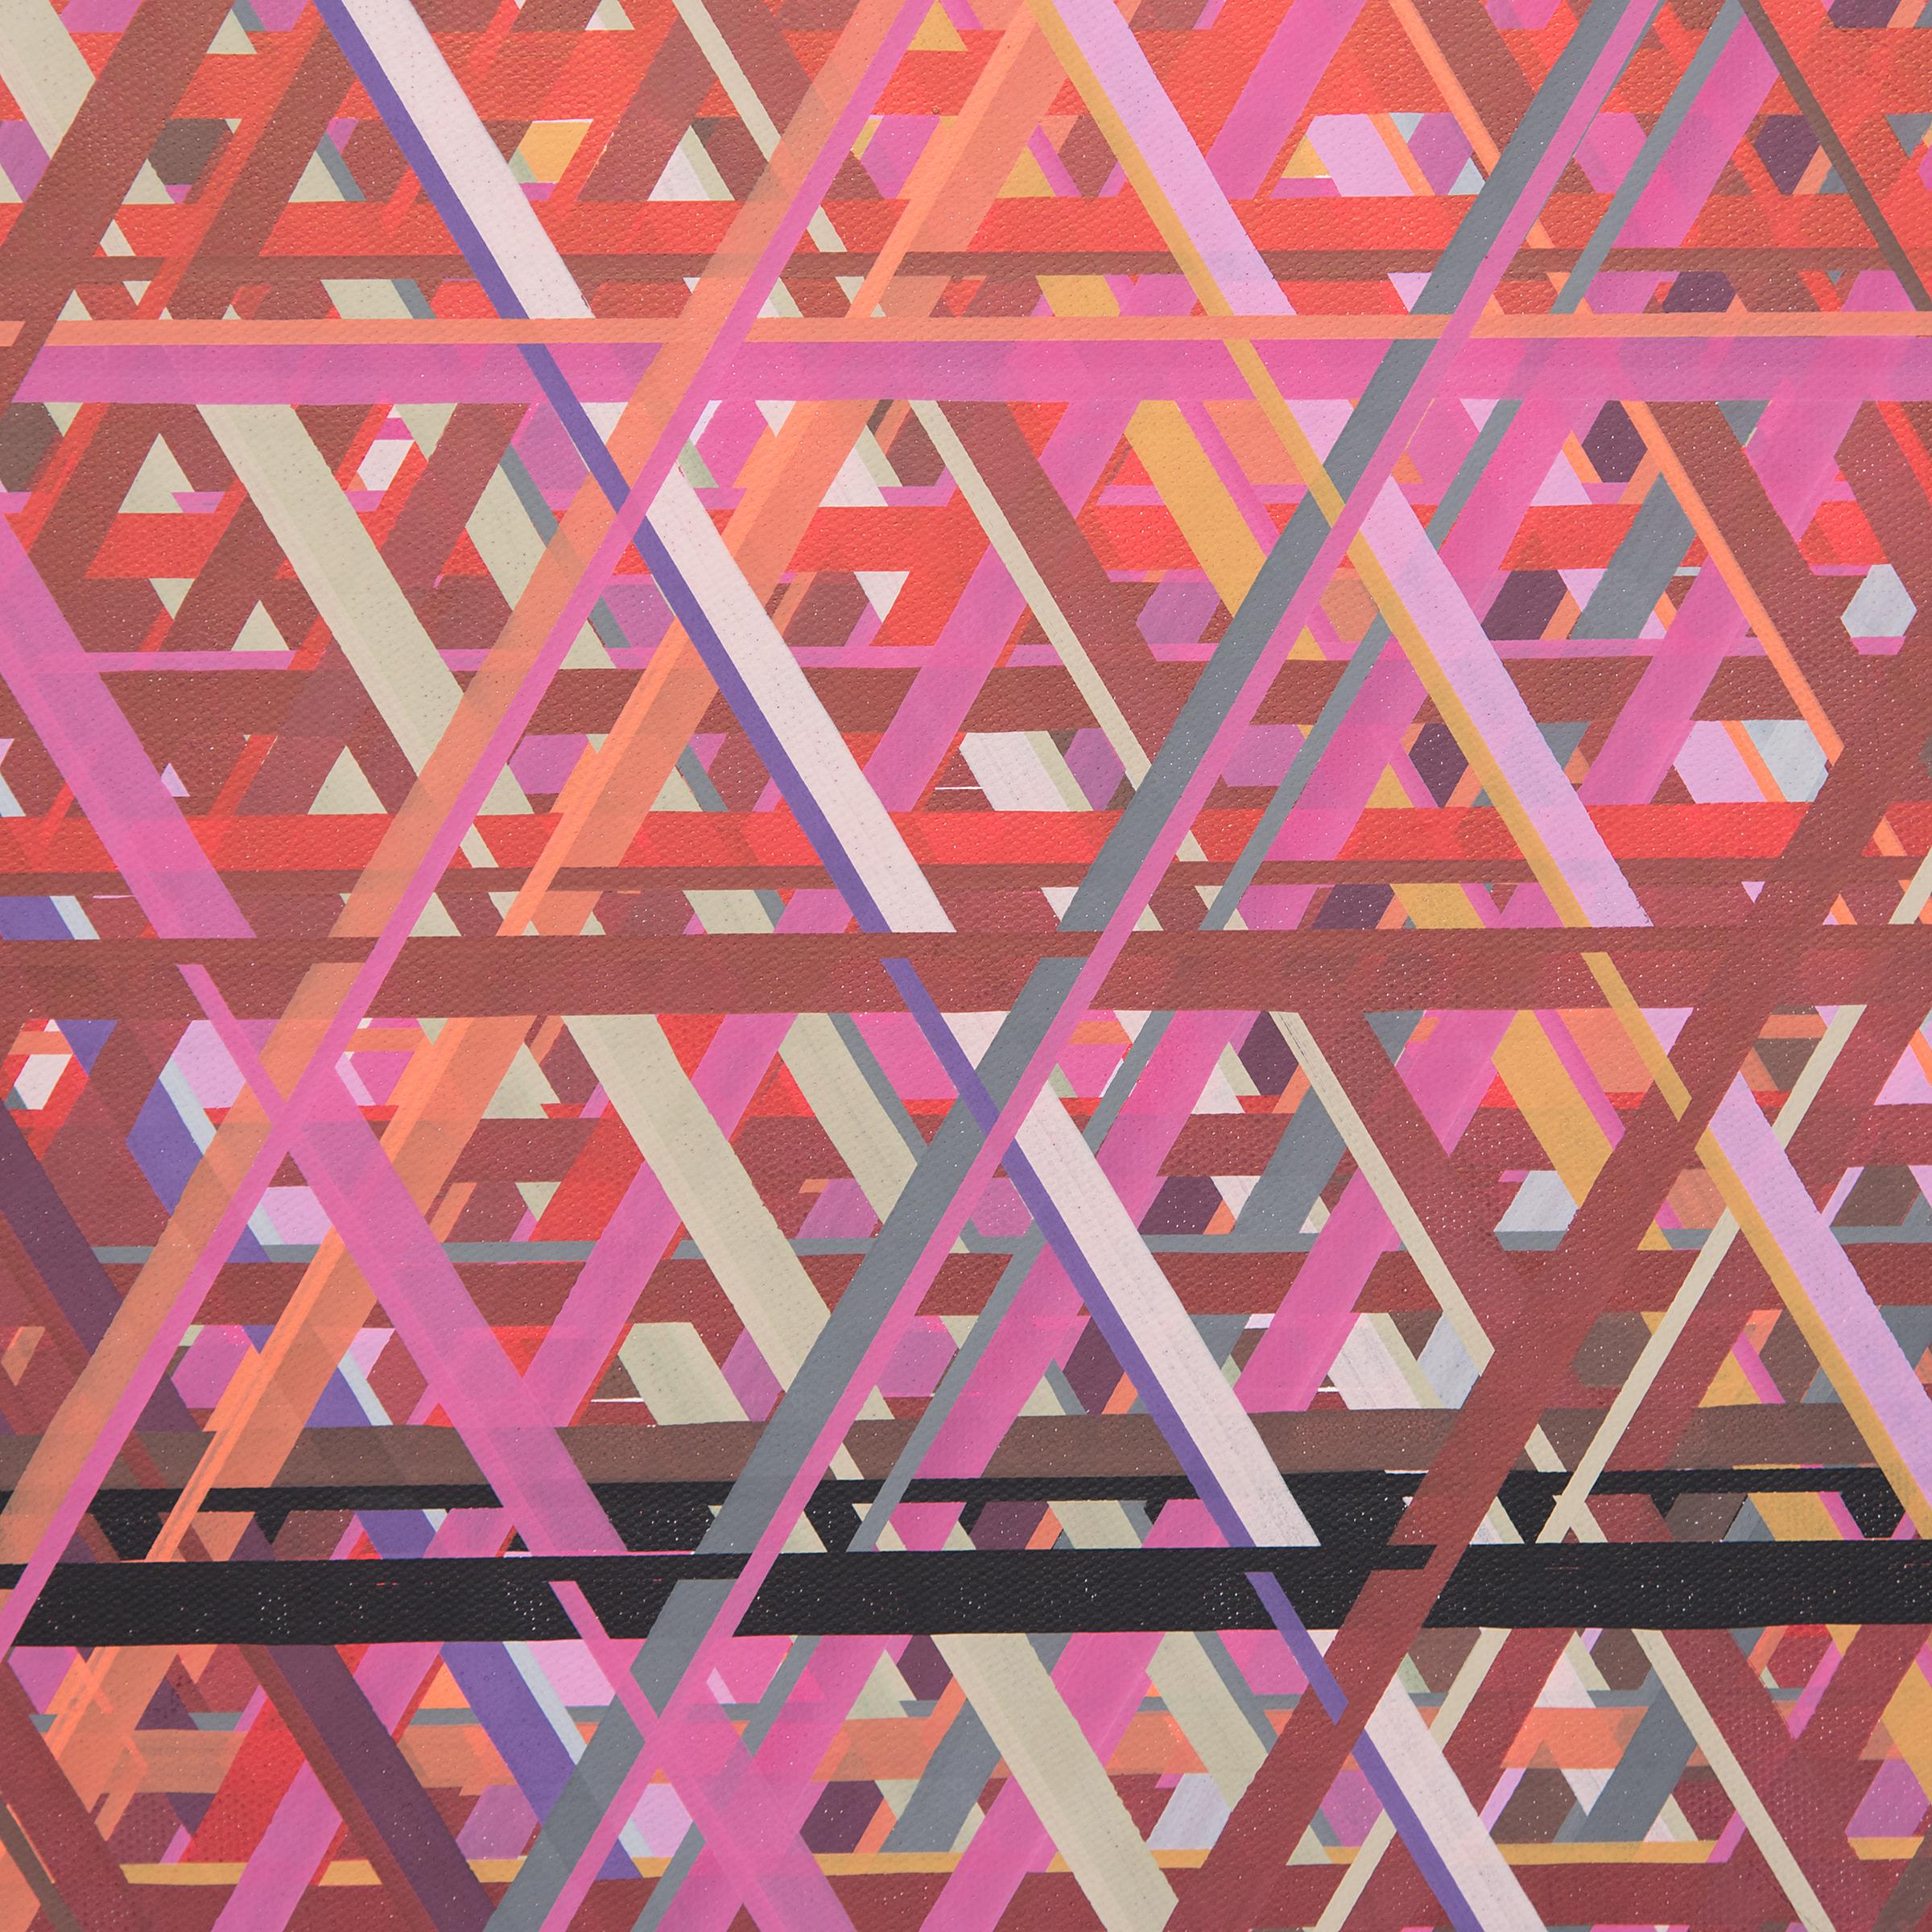 The colorful paintings of Jan Pieter Fokkens transport us to distant worlds beyond our comprehension. Within seemingly infinite networks of lines, dots, and crosses, he decodes the recognizable to create something unfamiliar.

Each two-dimensional